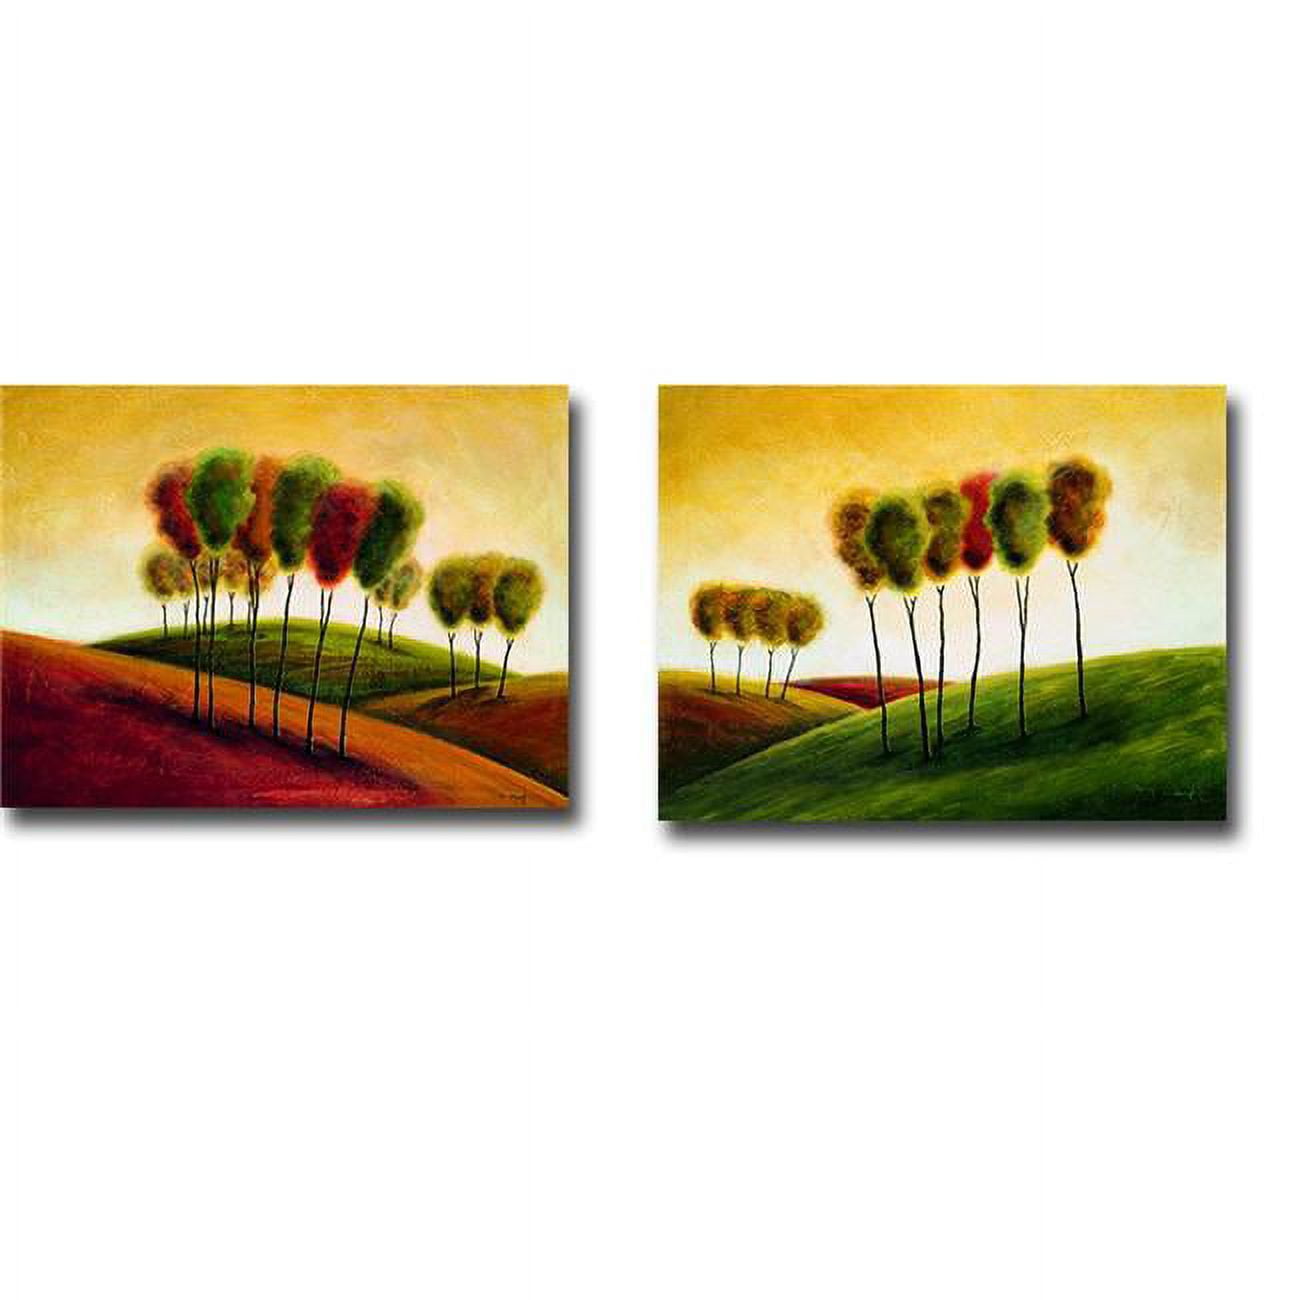 1216am512tg A New Morning I & Ii By Michael Klung 2-piece Premium Gallery-wrapped Canvas Giclee Art Set - 12 X 16 X 1.5 In.